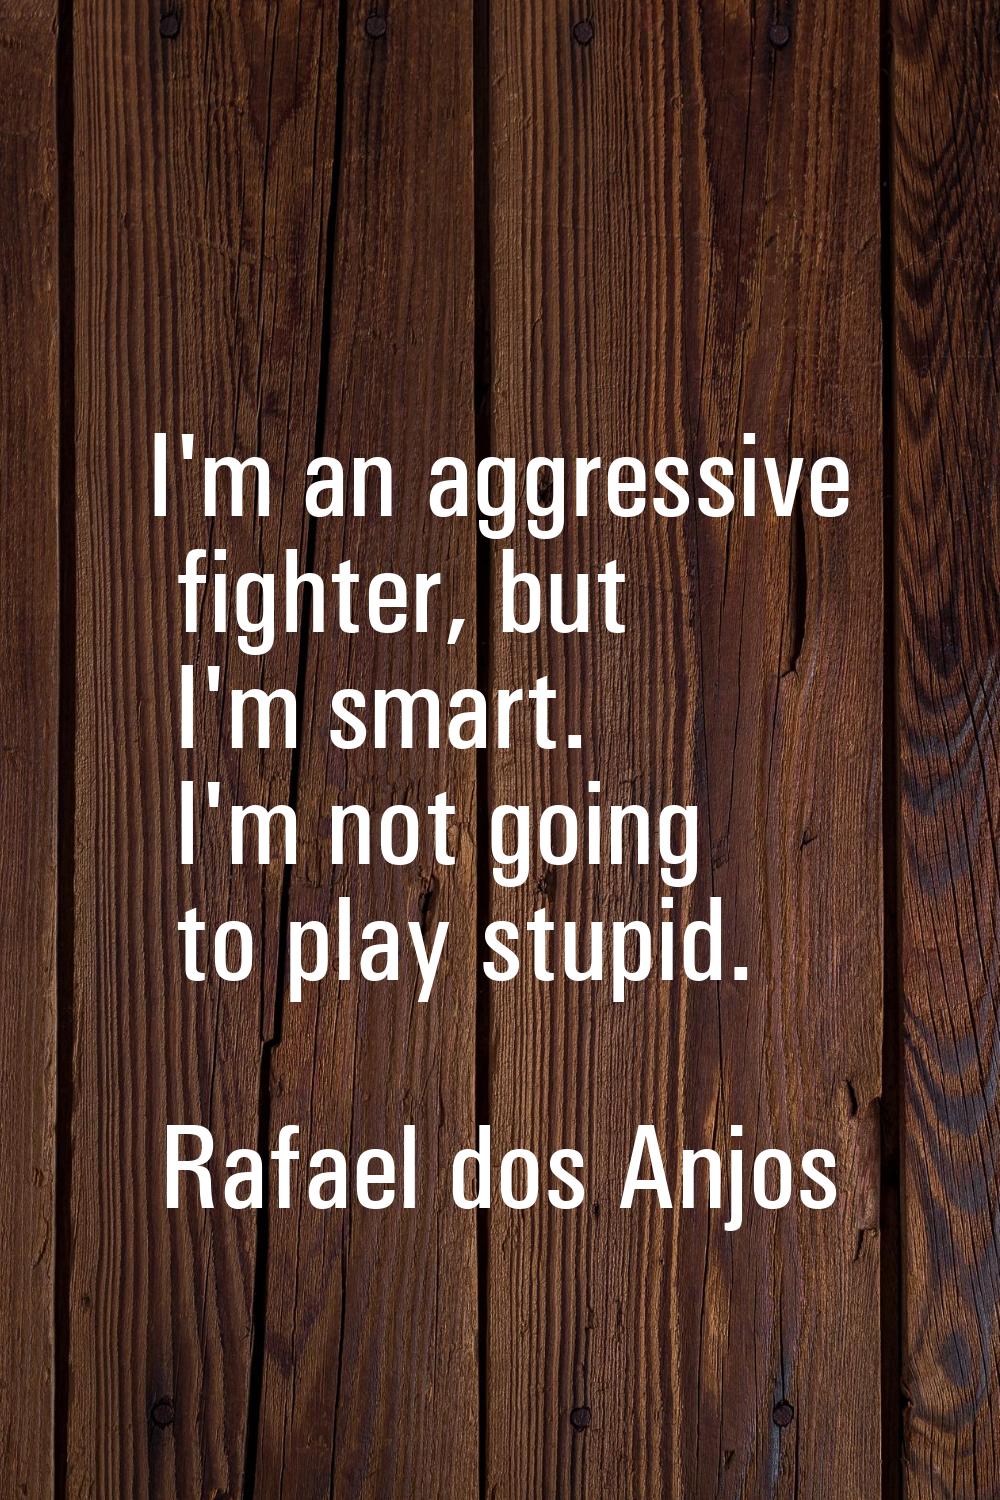 I'm an aggressive fighter, but I'm smart. I'm not going to play stupid.